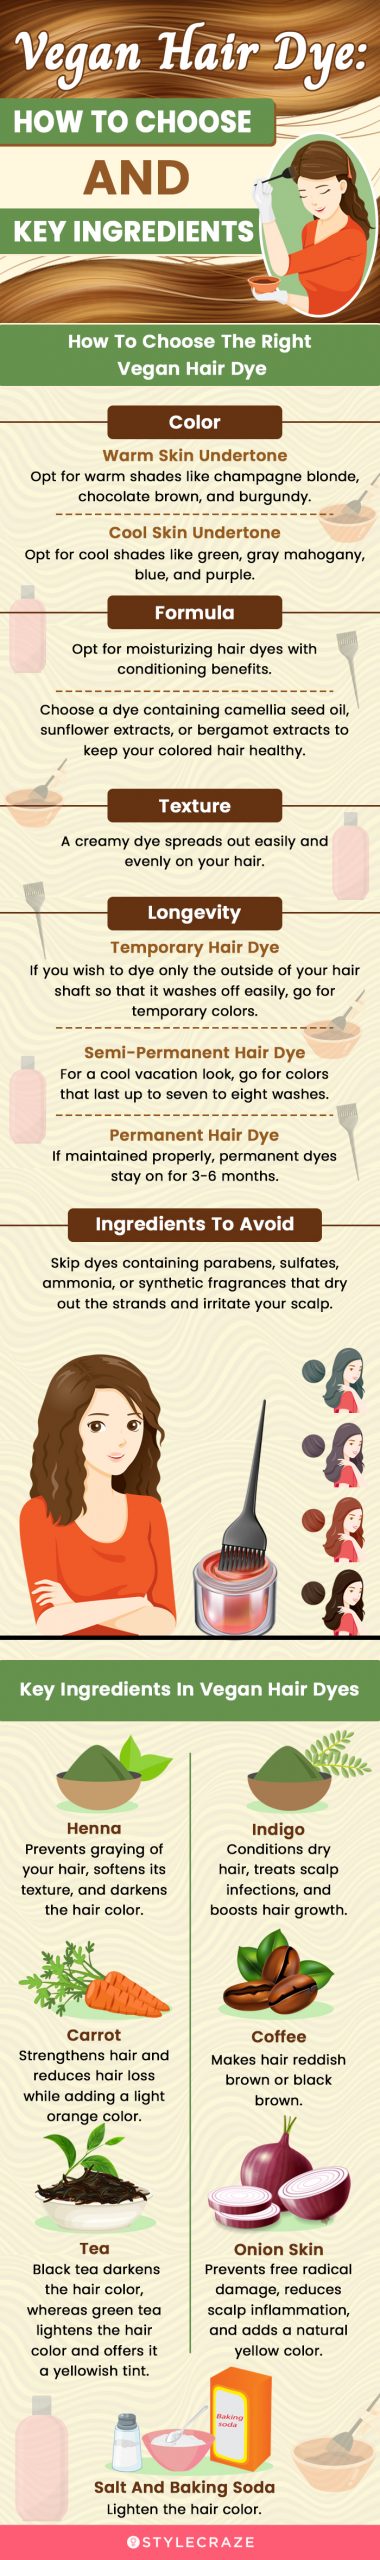 Vegan Hair Dye: How To Choose And Key Ingredients  [infographic]